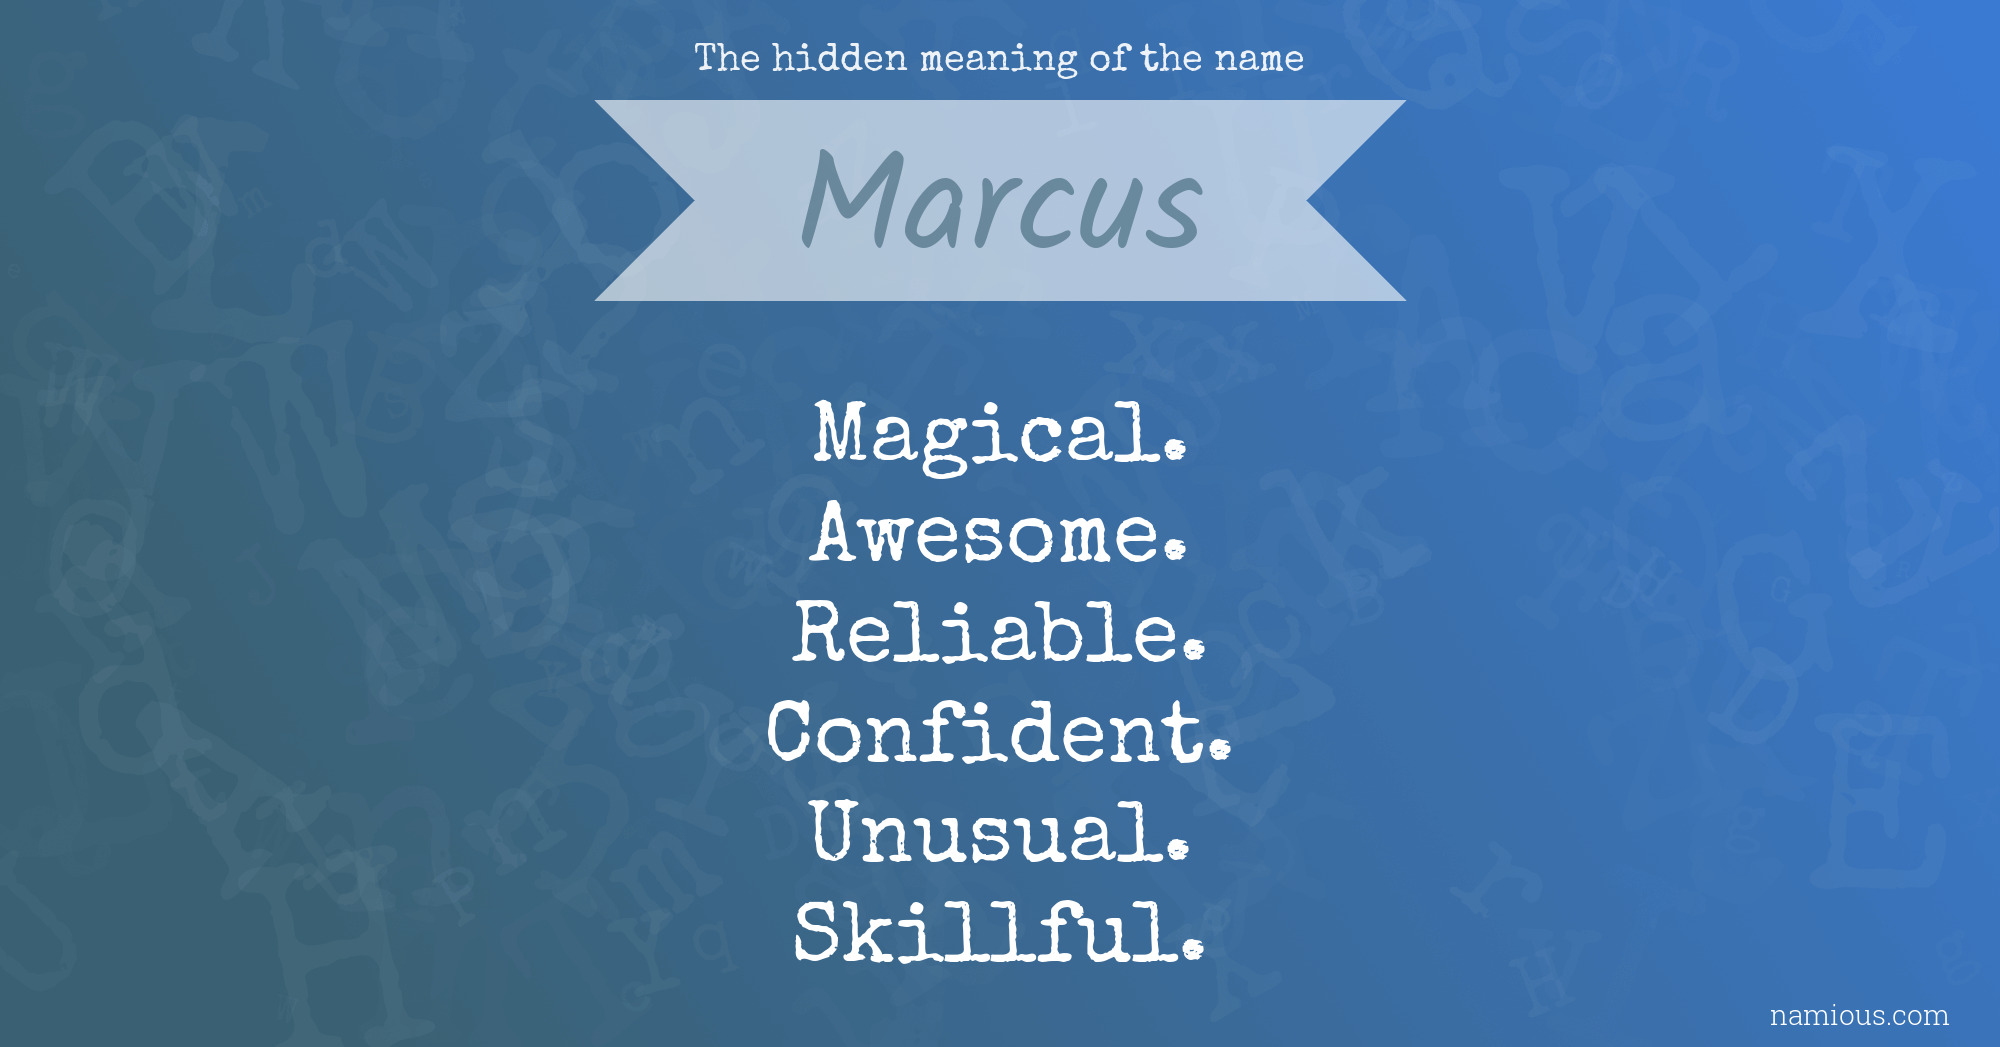 The hidden meaning of the name Marcus